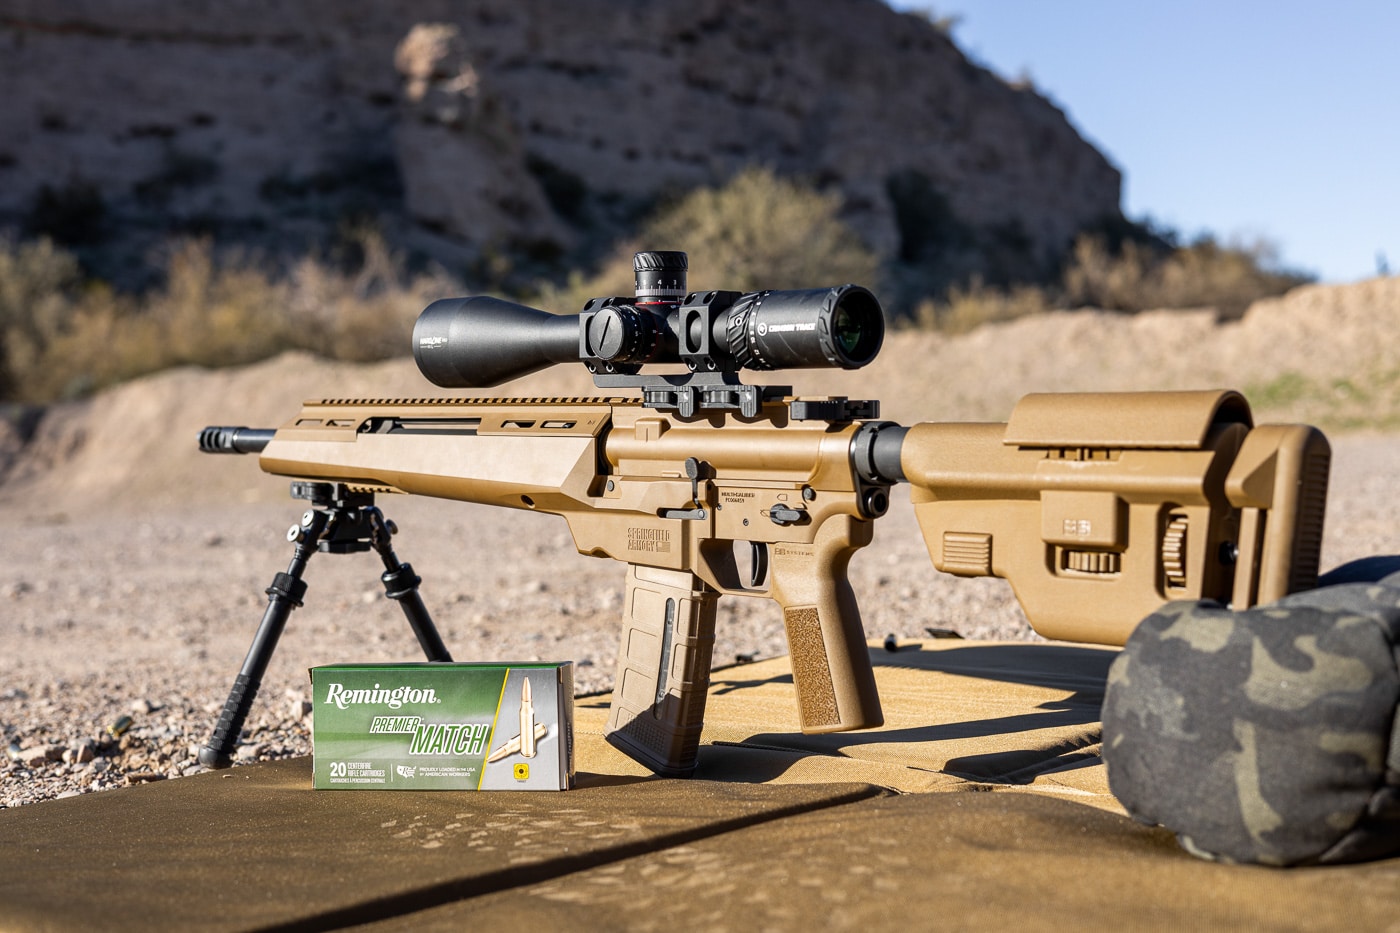 crimson trace pro scope on springfield atc for testing on the shooting range